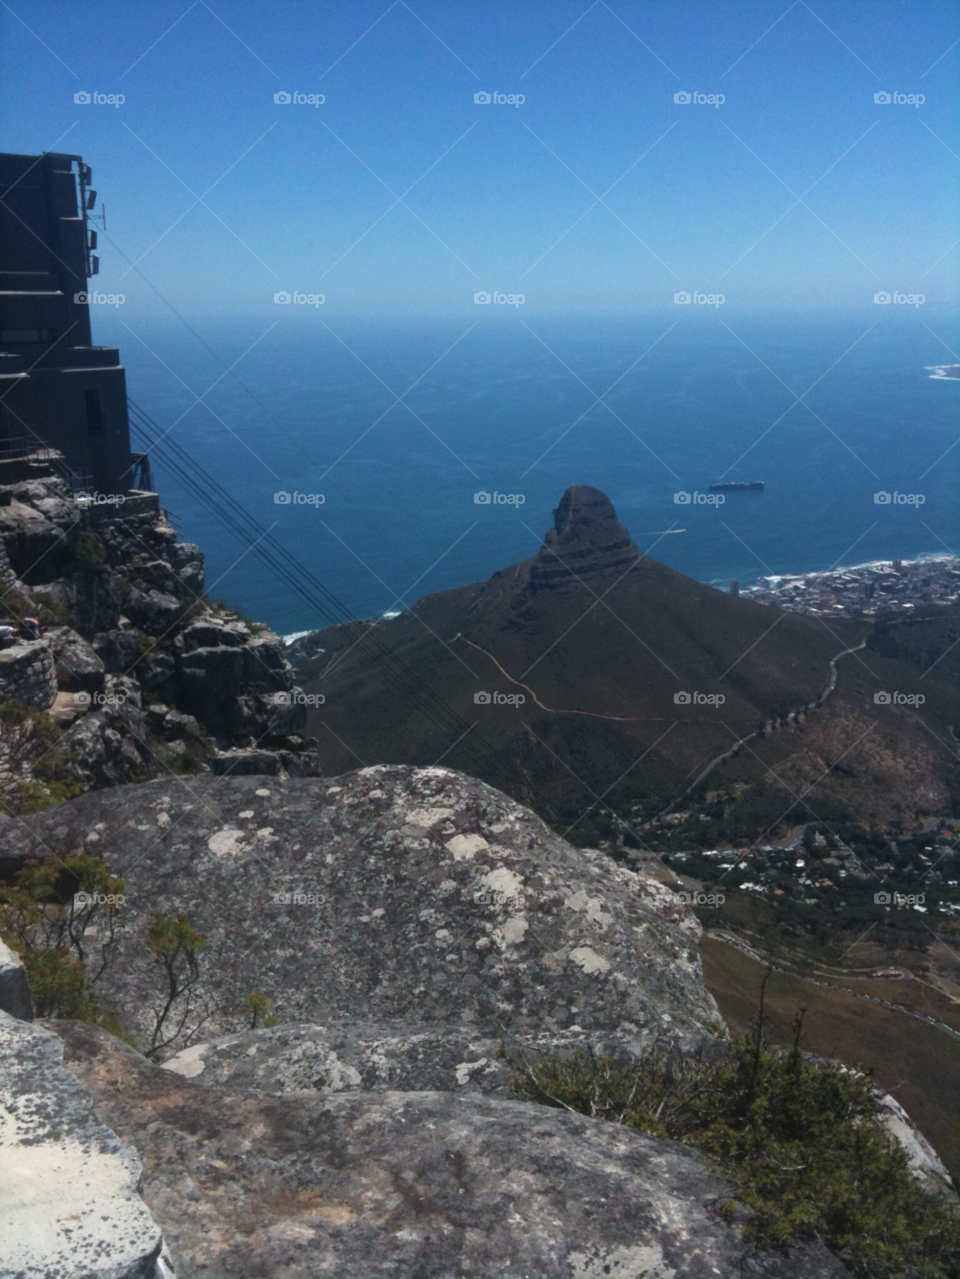 table mountain south africa south africa view of cable car table mountain by zippypitt